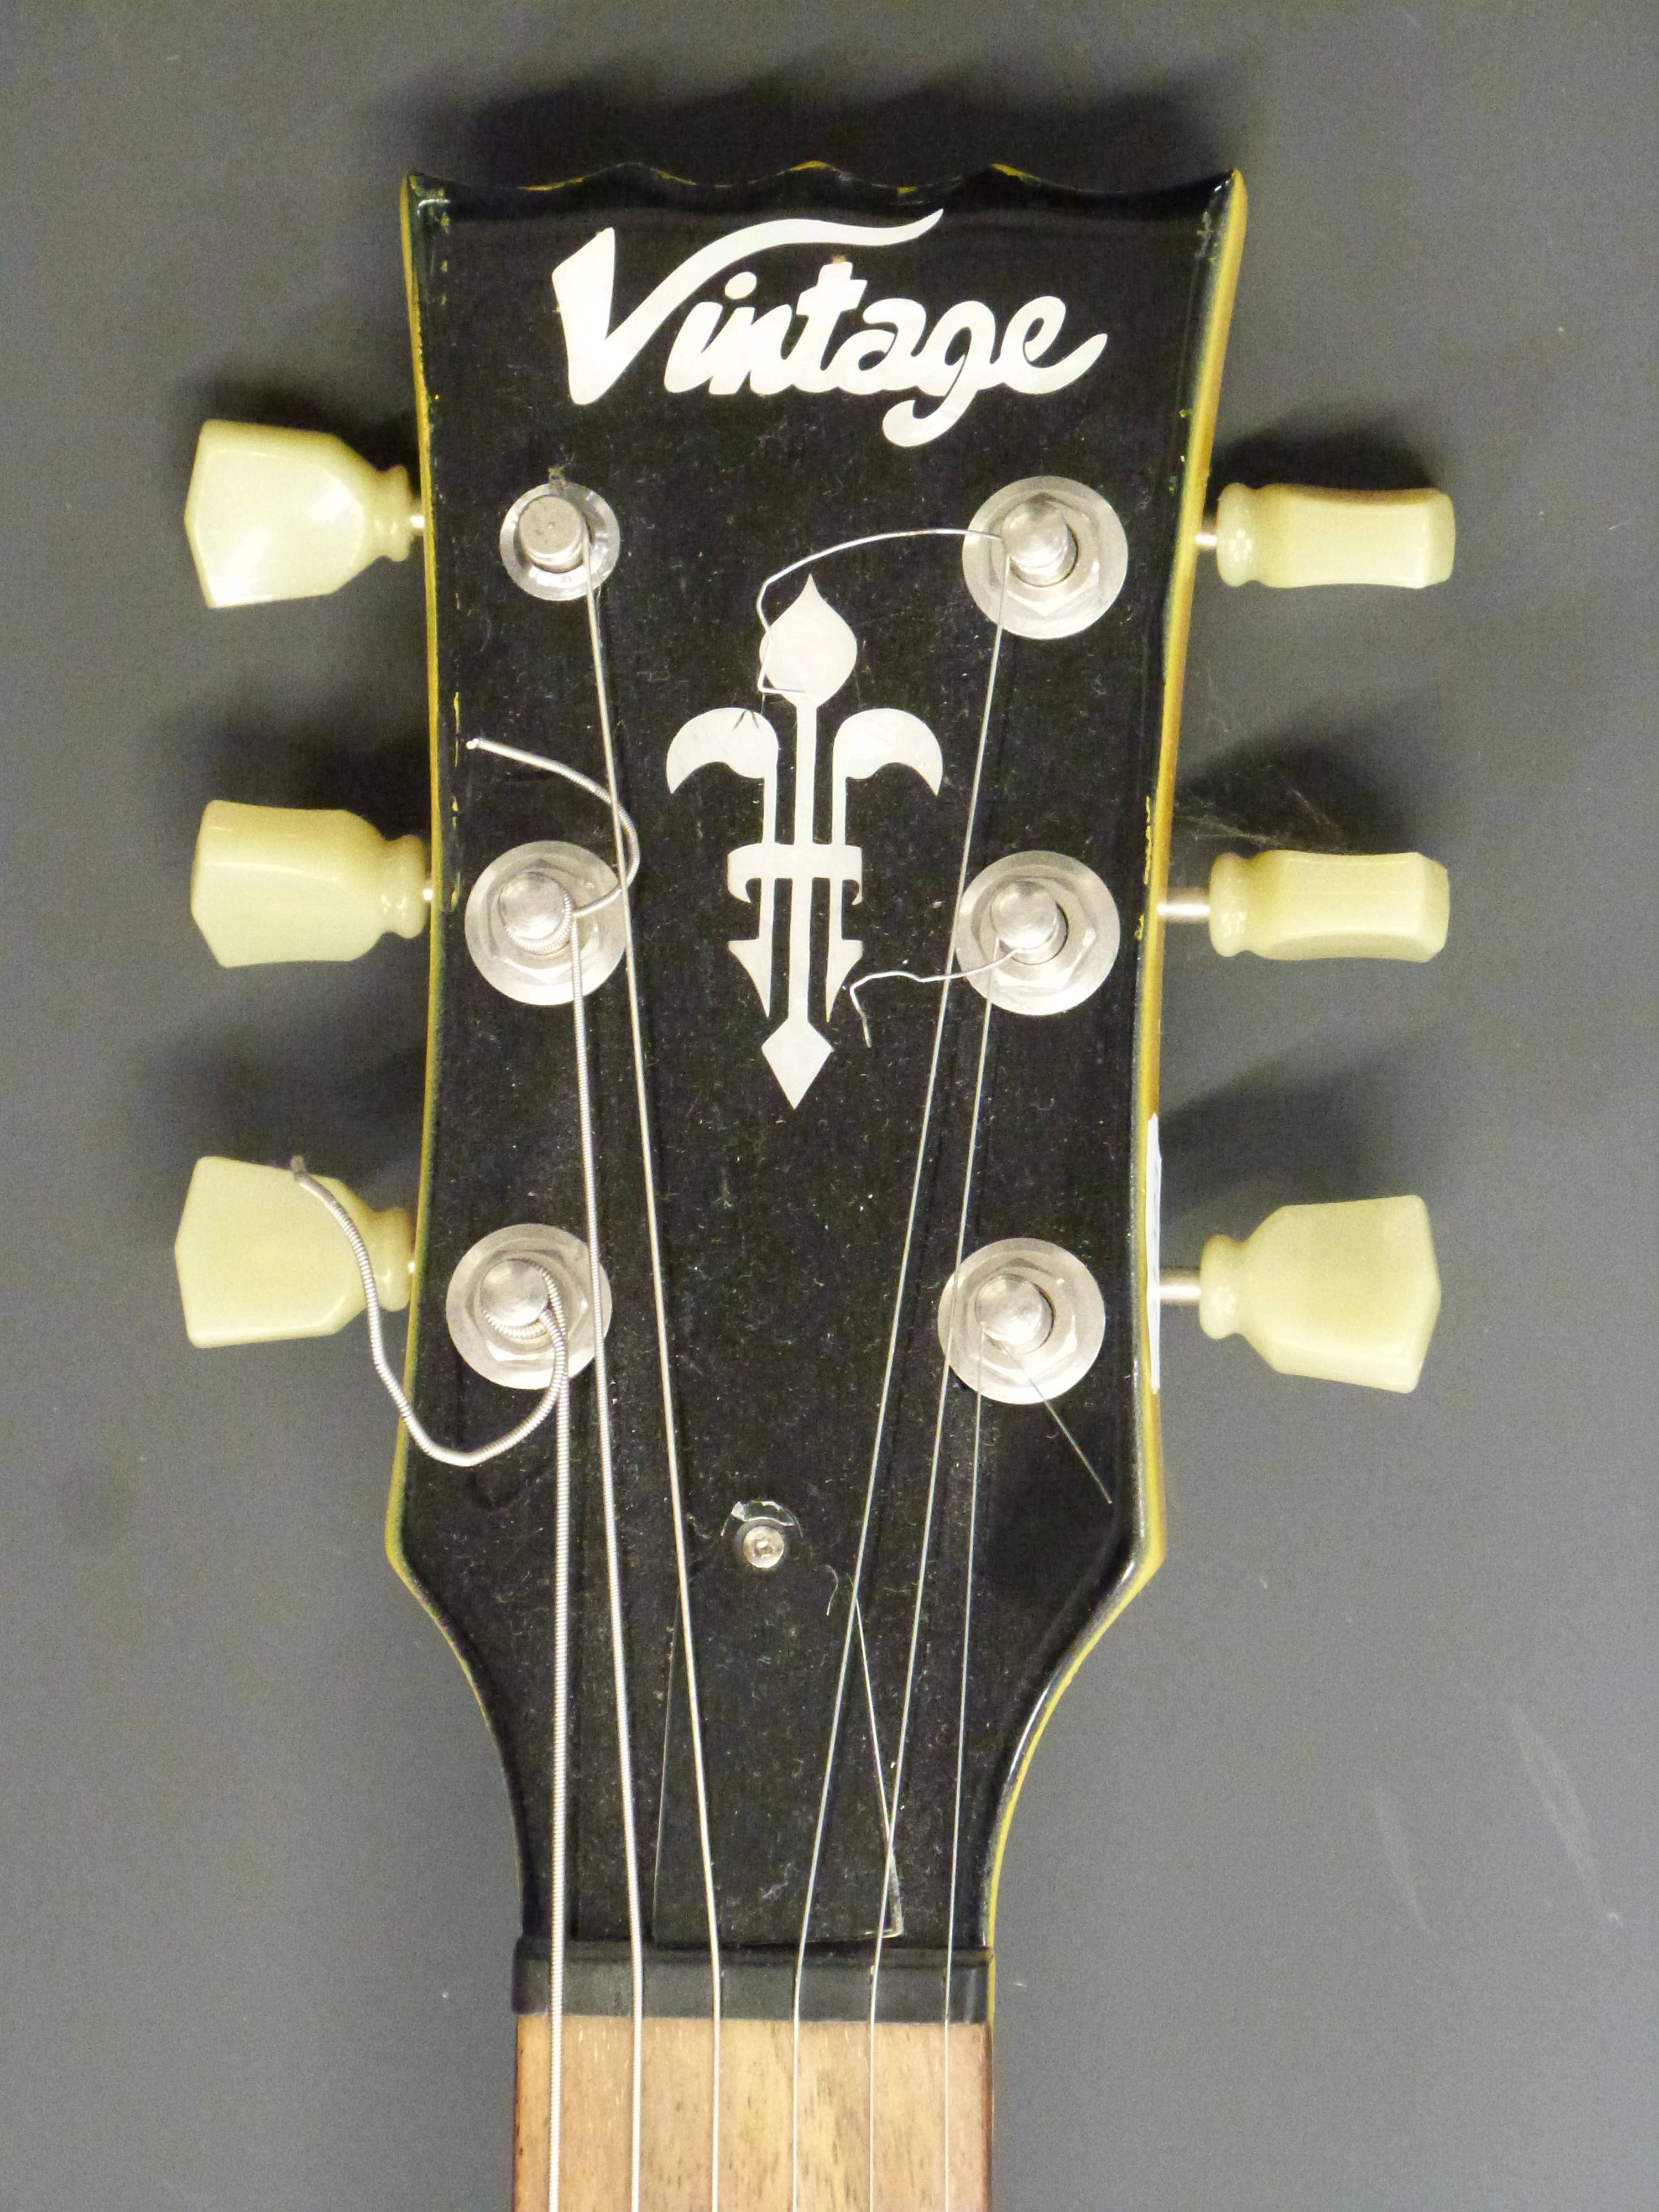 Electric guitar in yellow lacquered finish by Vintage, Wilkinson pick-up - Image 3 of 6